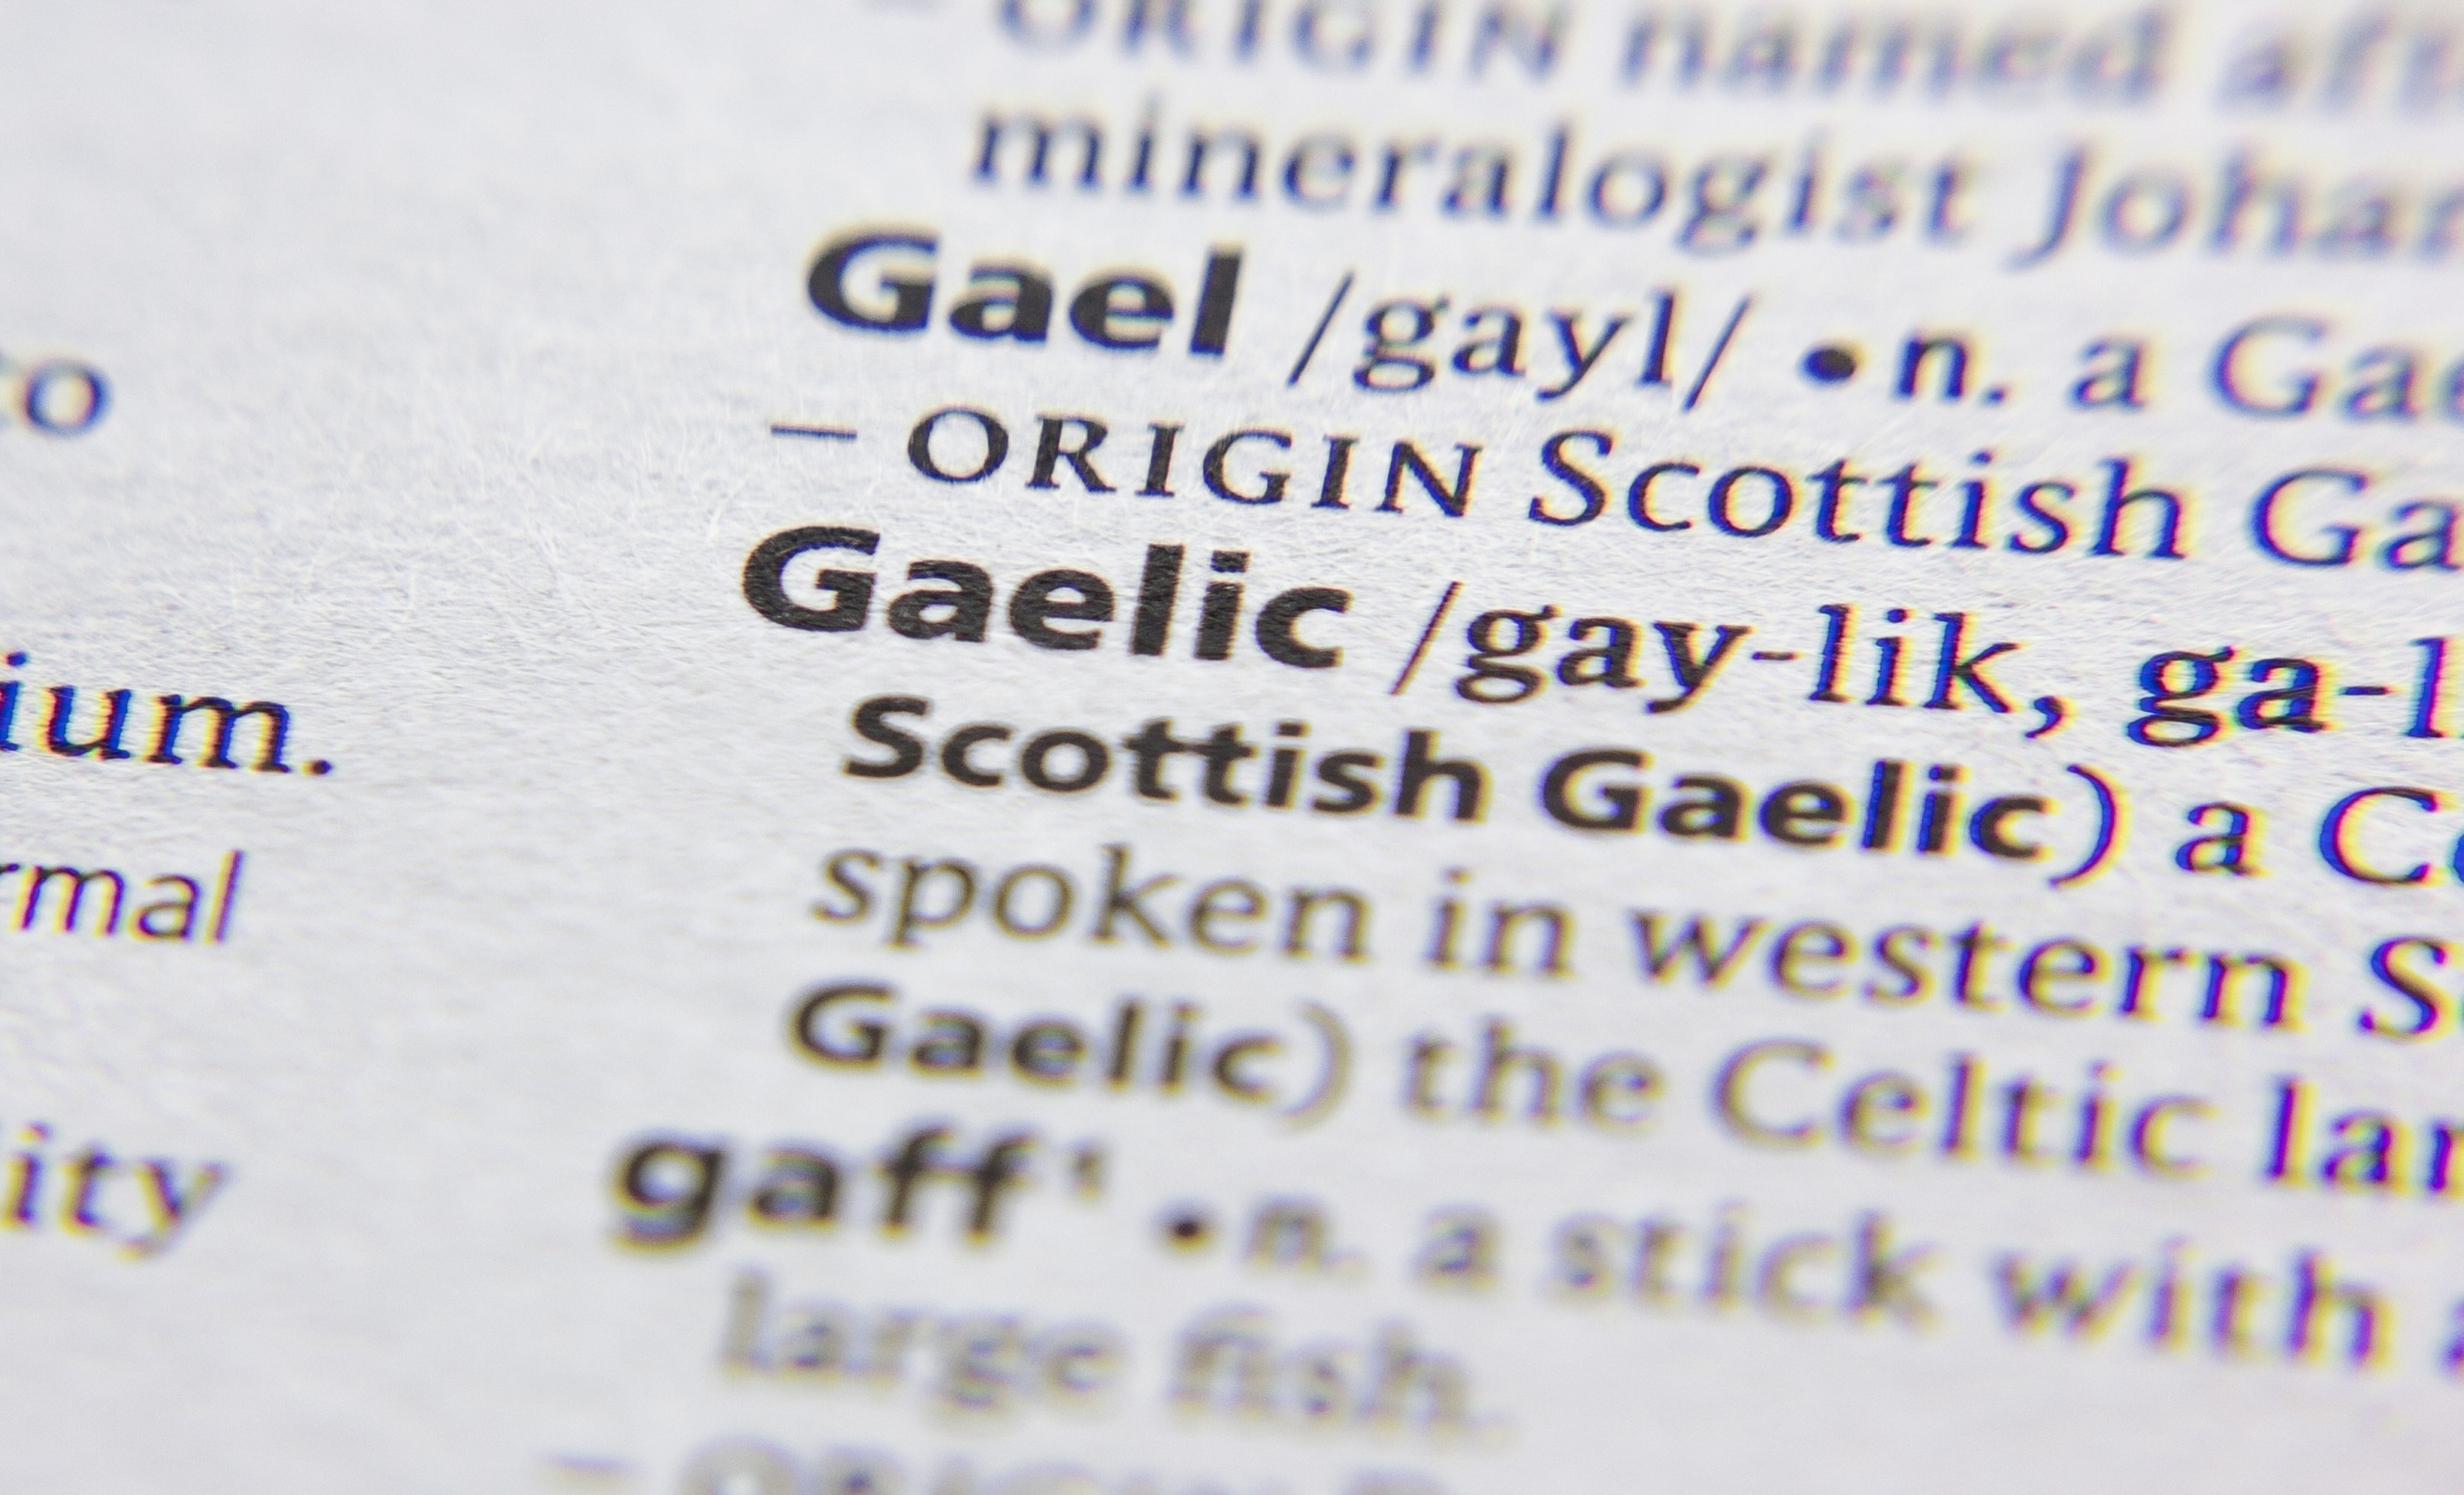 The word "Gaelic" defined in a dictionary